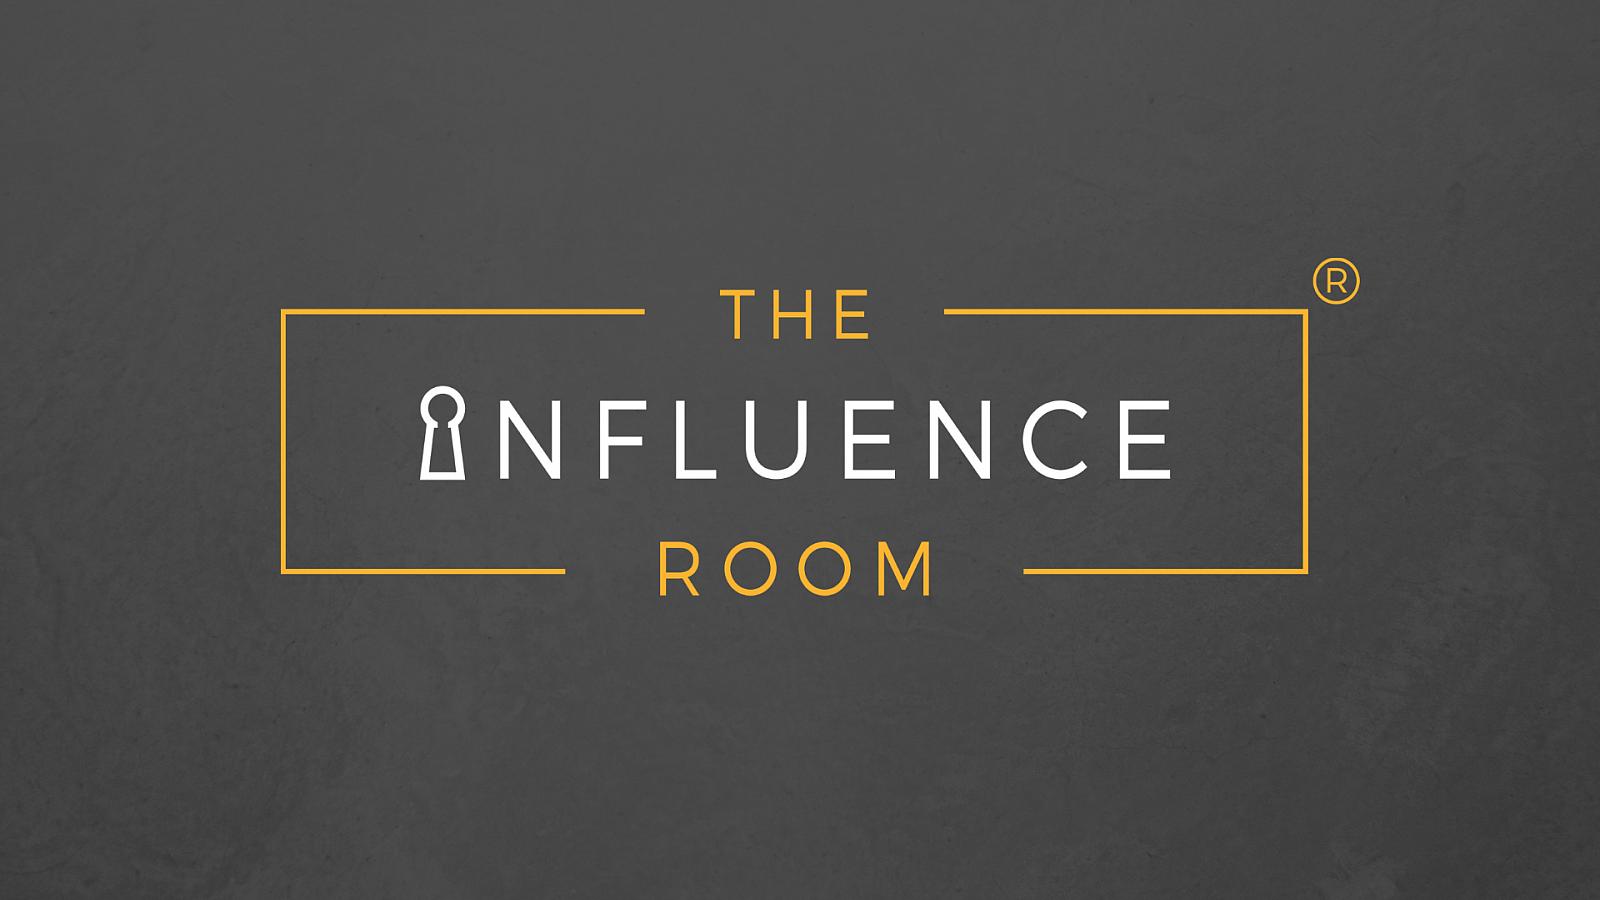 The new exclusive Influencer Marketing club where members trade in authentic advocacy